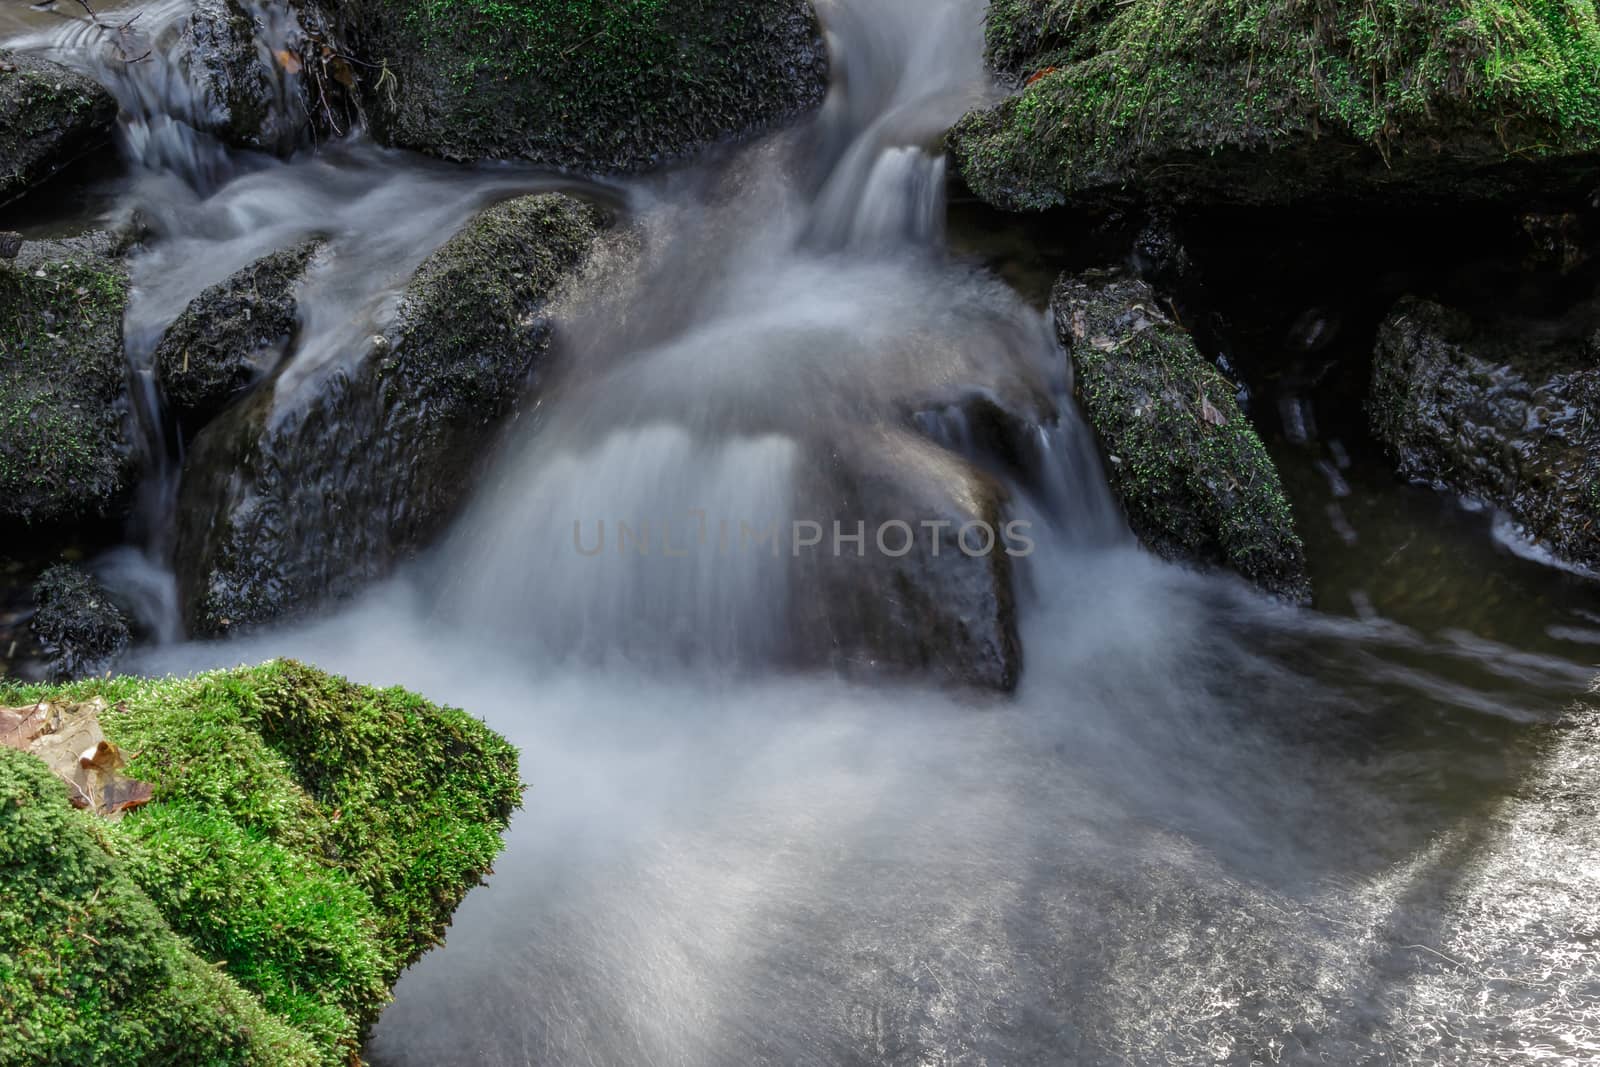 blurred view of a mountain stream between stones